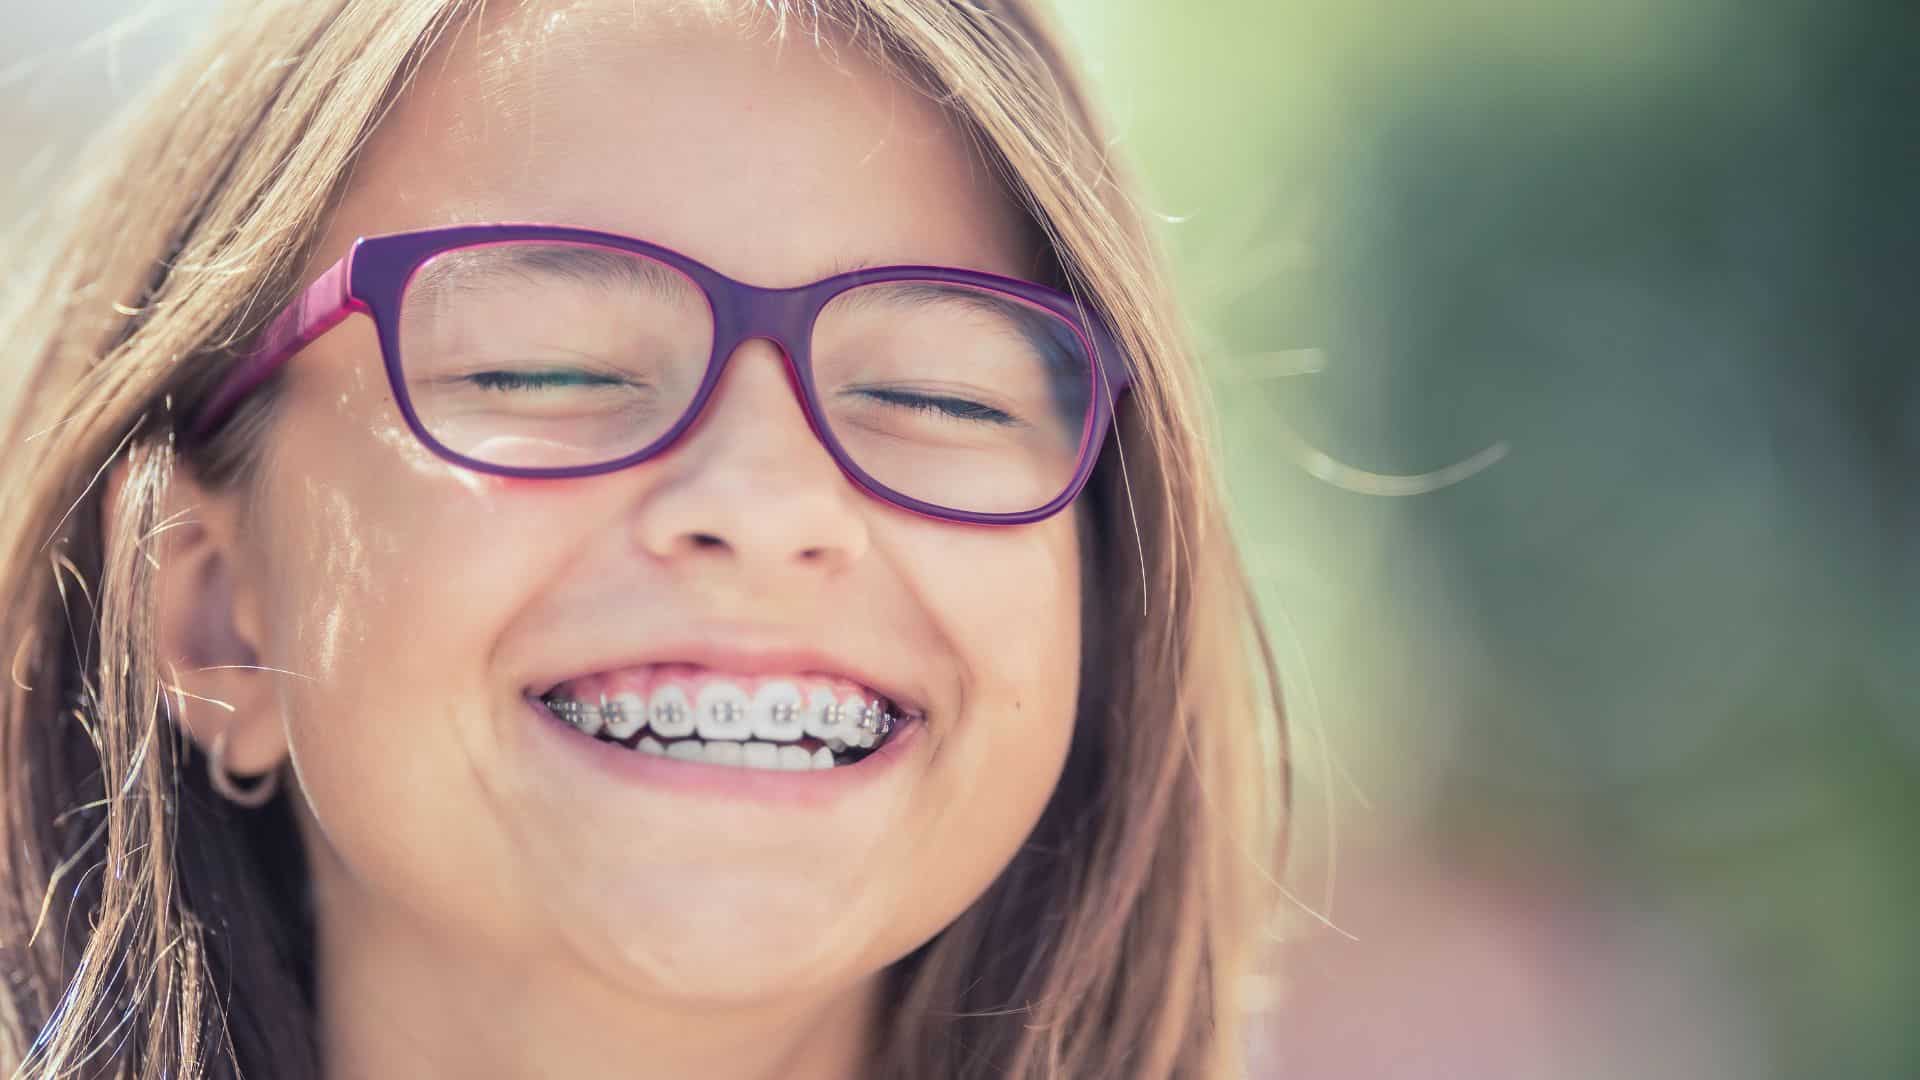 Smiling school girl with braces